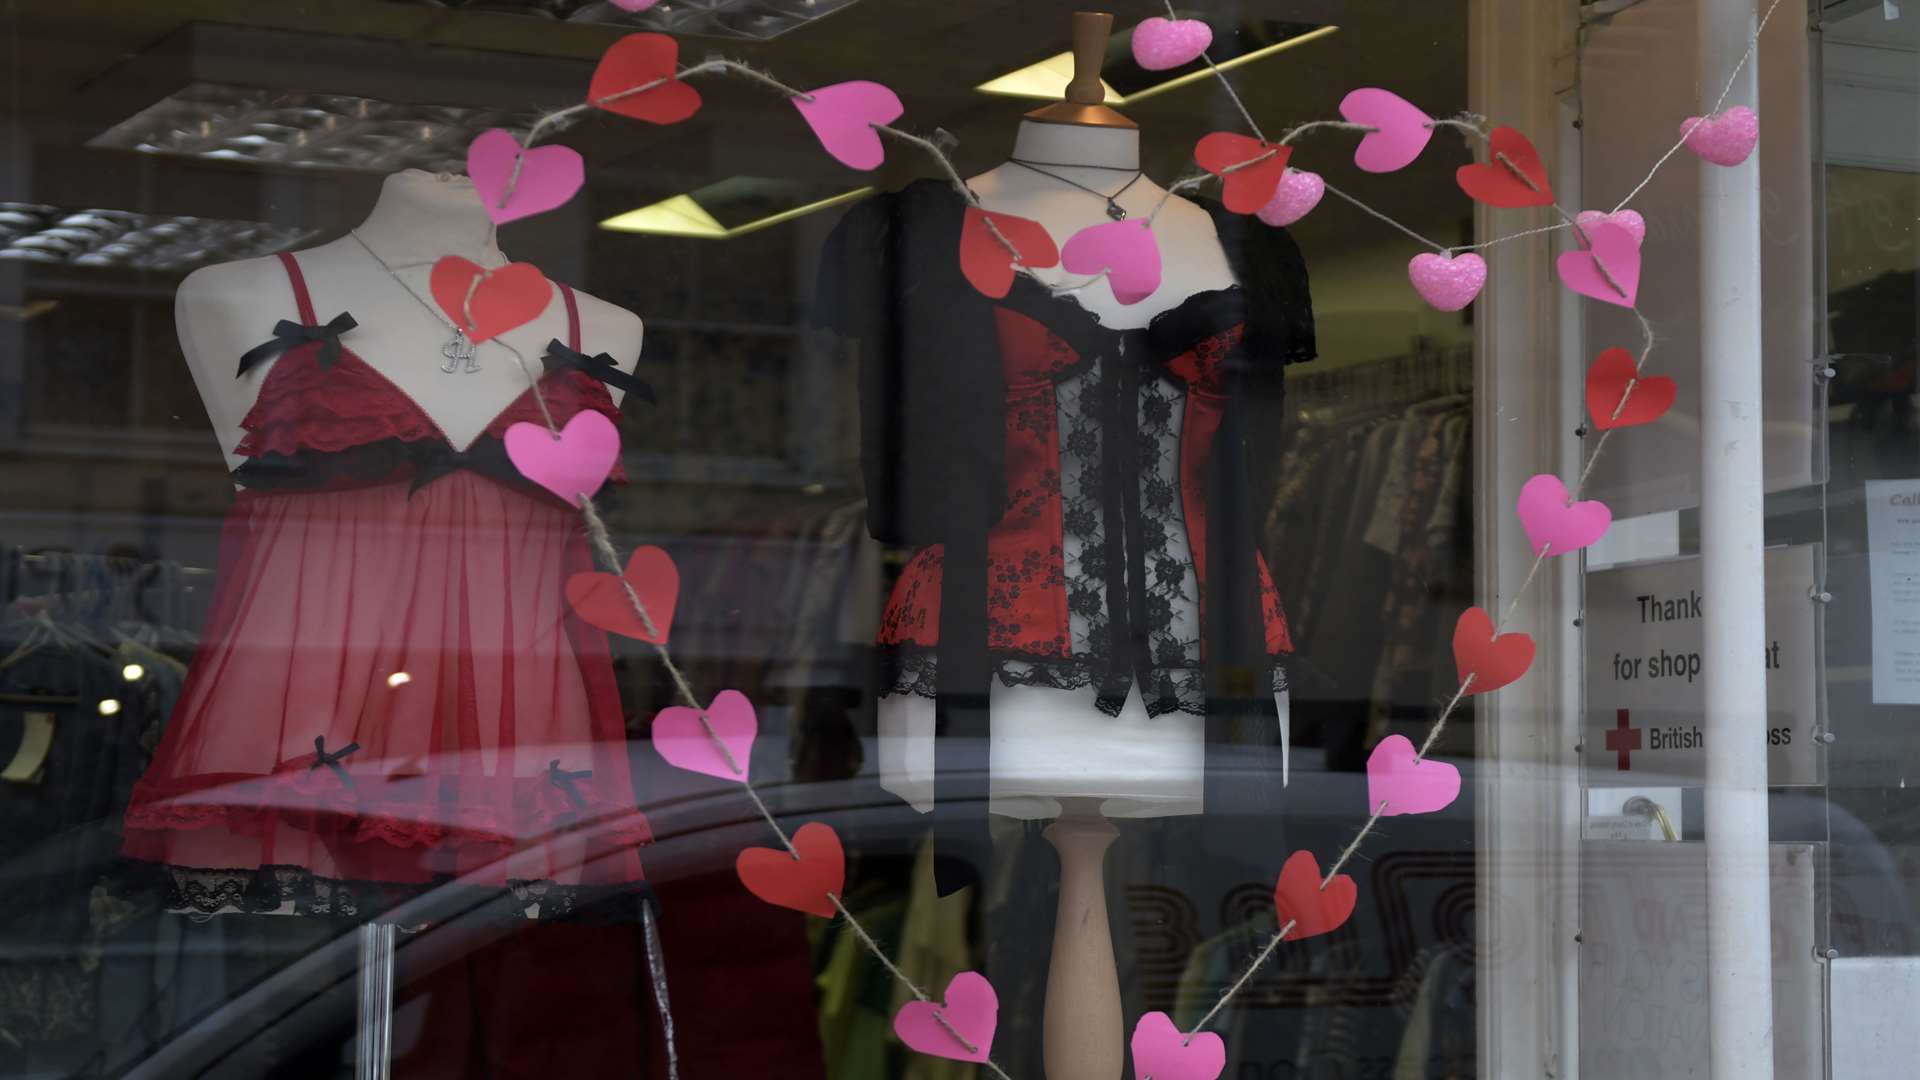 The provocative outfits occupy the window of the charity shop. Picture: Barry Goodwin